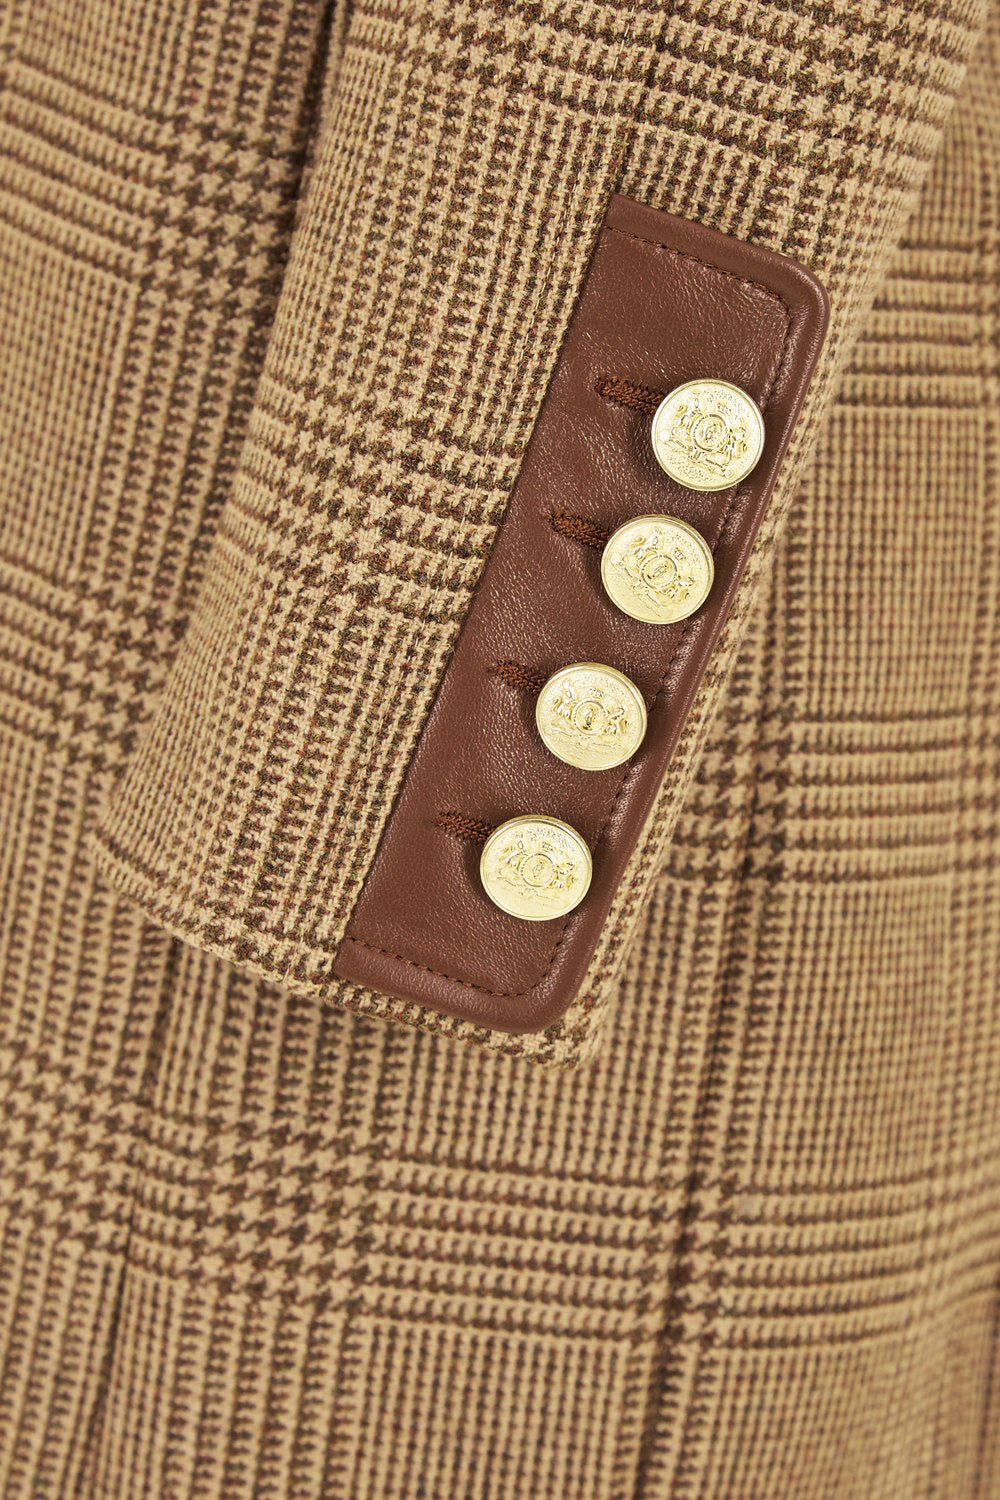 sleeve detail of tan brown tweed womens coat with gold hardware and brown suede detailing